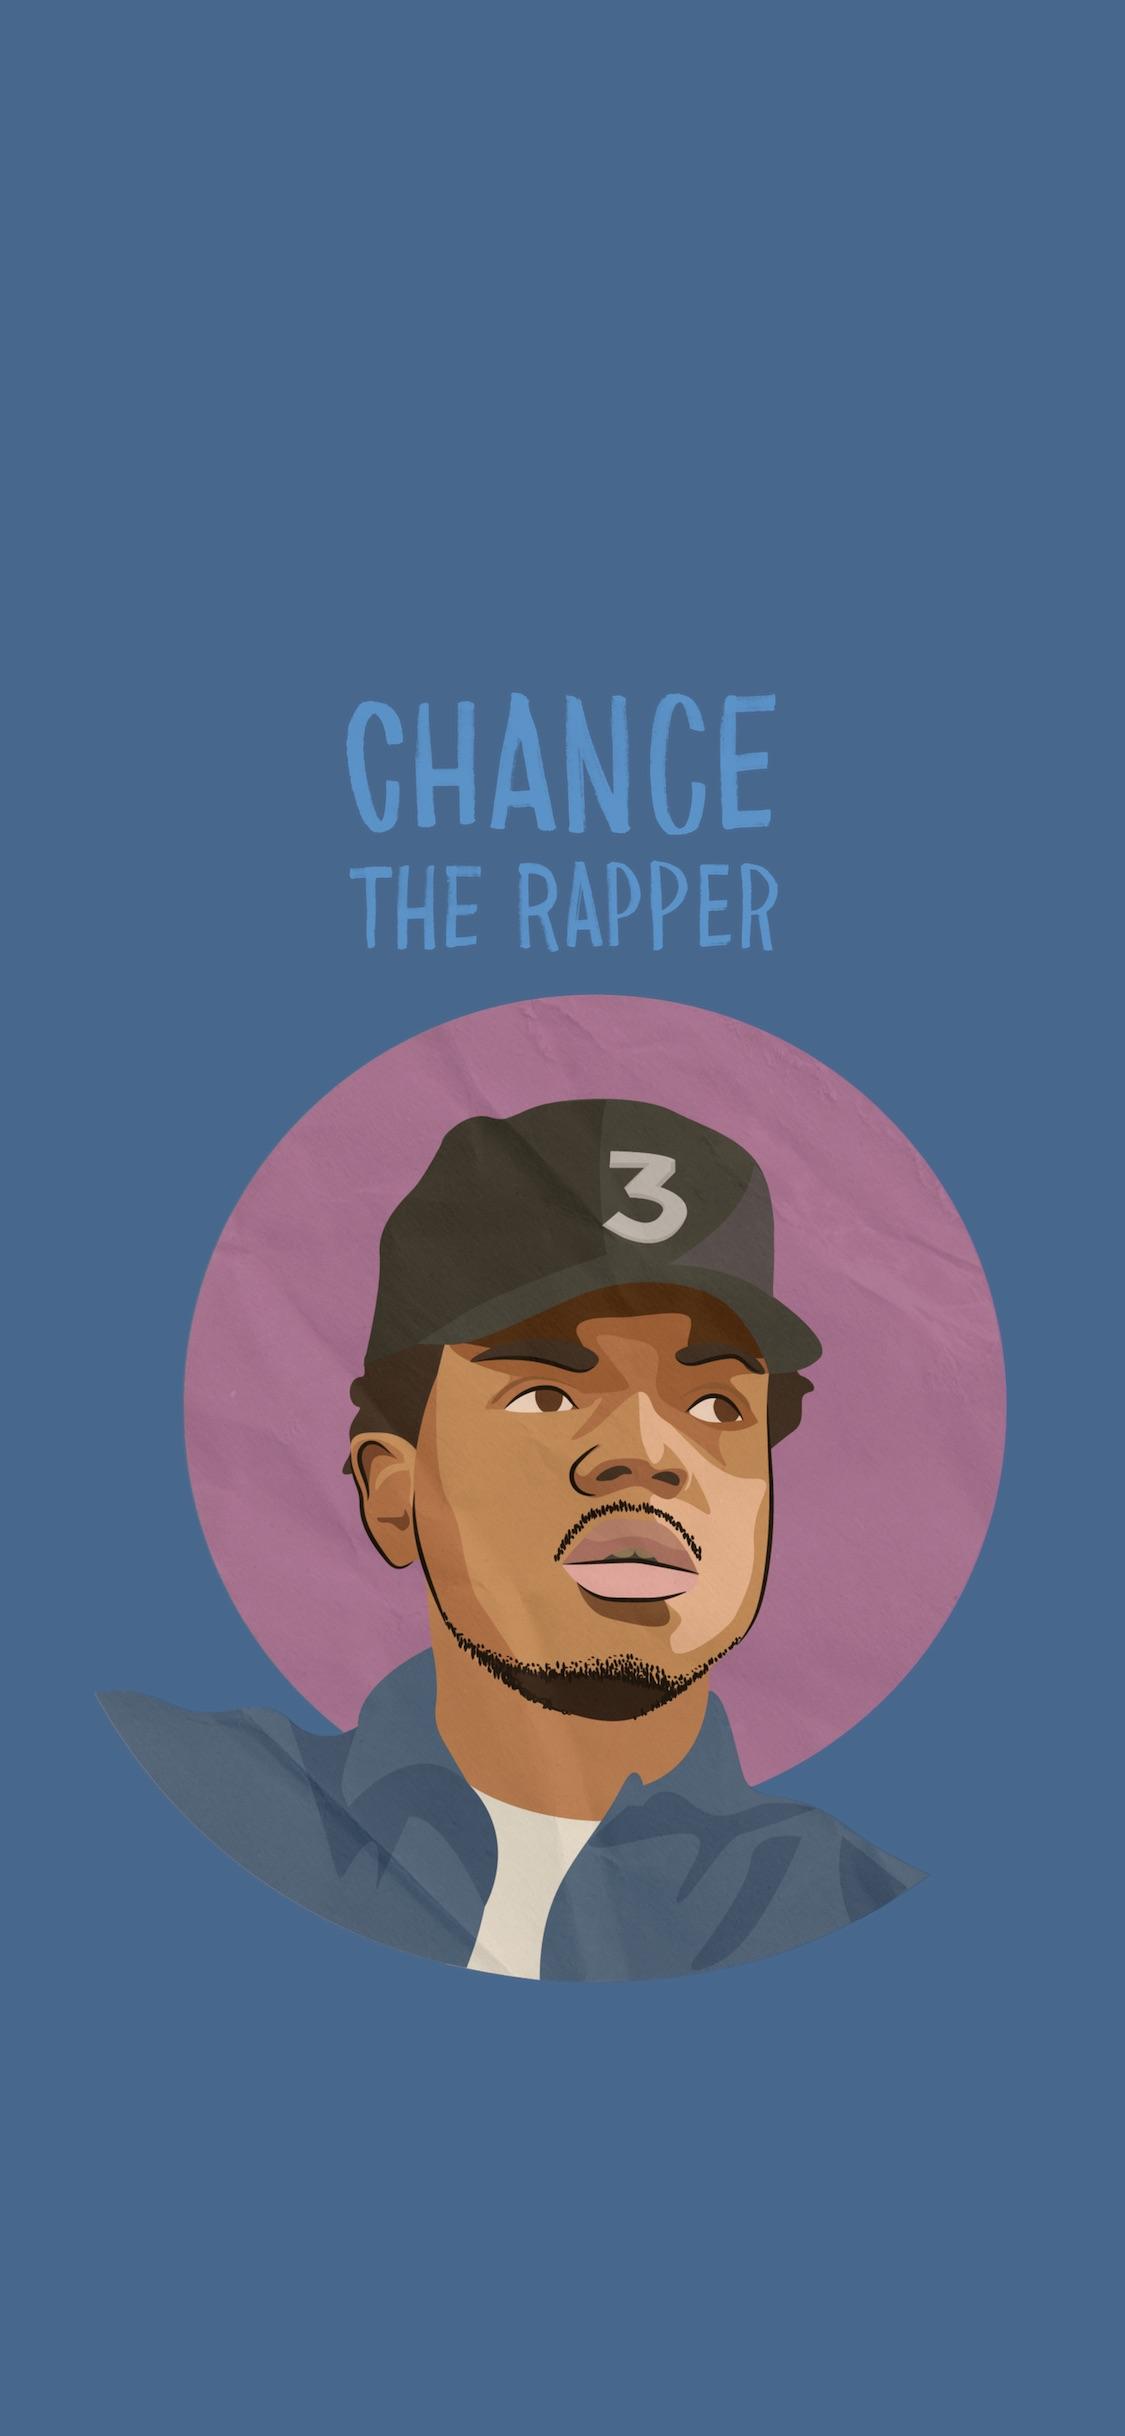 Chance The Rapper - Chance The Rapper Wallpaper Iphone X , HD Wallpaper & Backgrounds